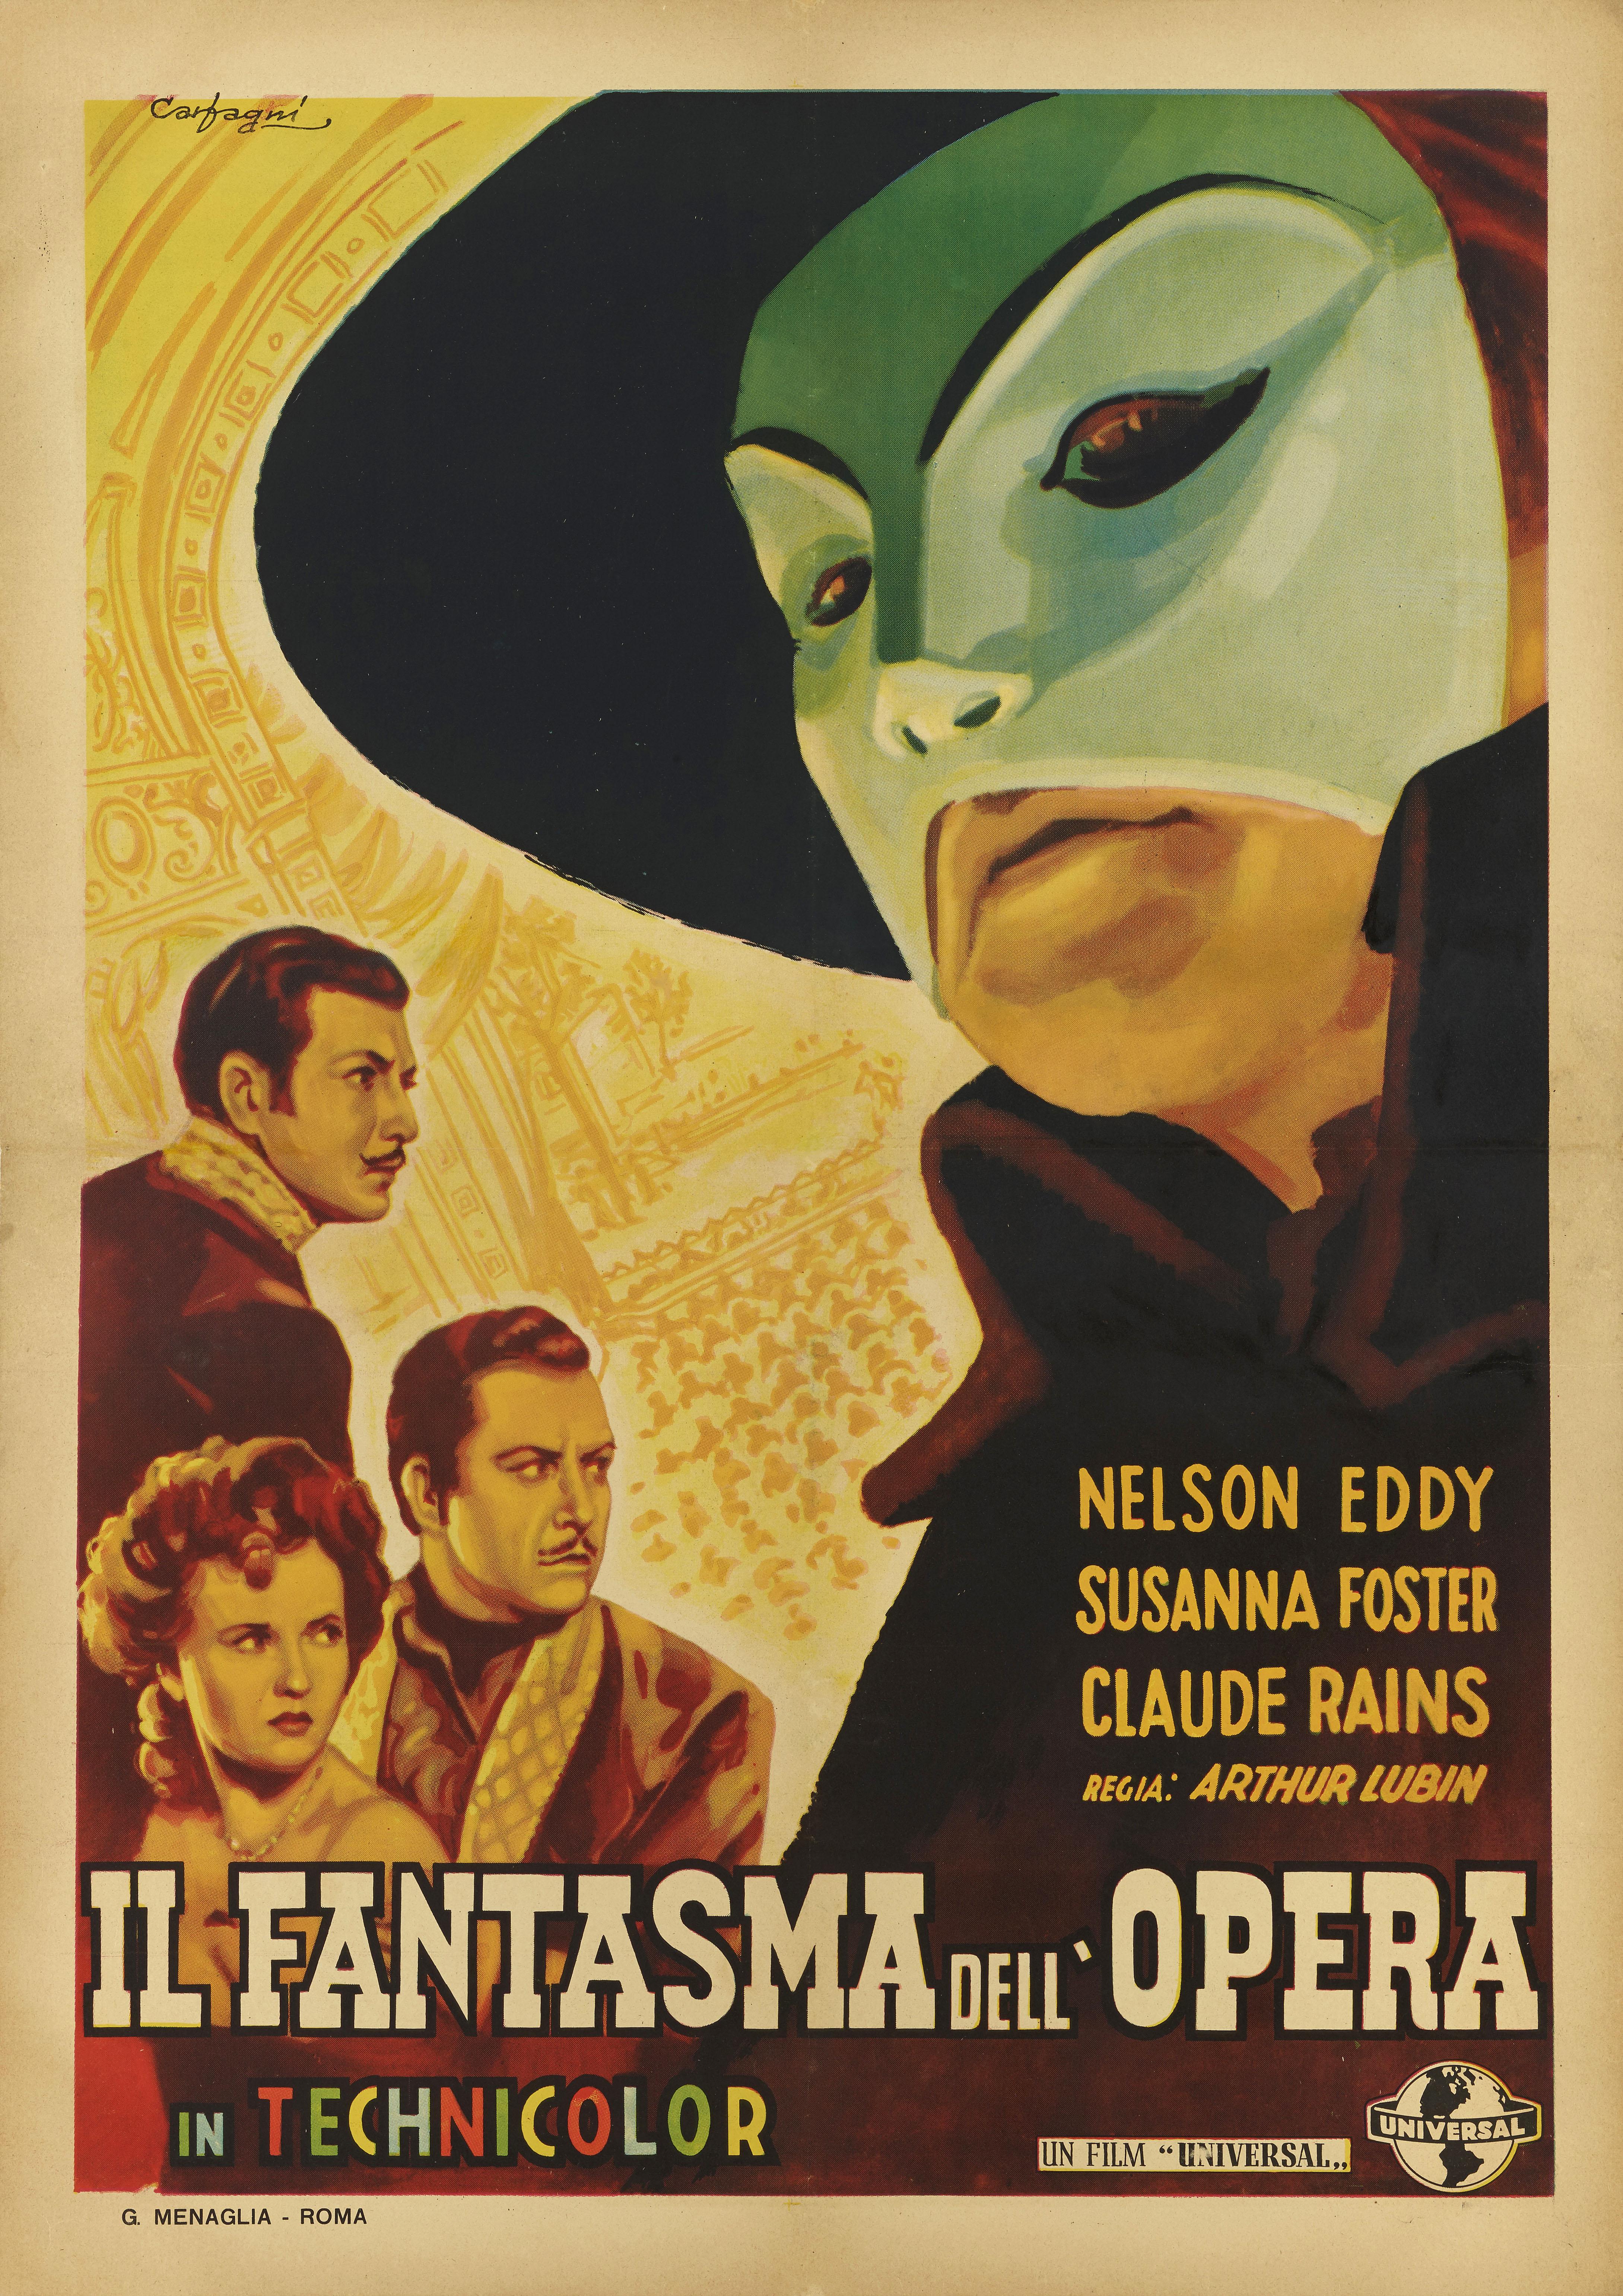 Original Italian film poster for the 1943 Horror film The Phantom of the Opera.
This film was directed by Arthur Lubin. The cast includes Nelson Eddy, Susanna Foster and Claude Rains. It tells the story of violinist Erique Claudin (Claude Rains),